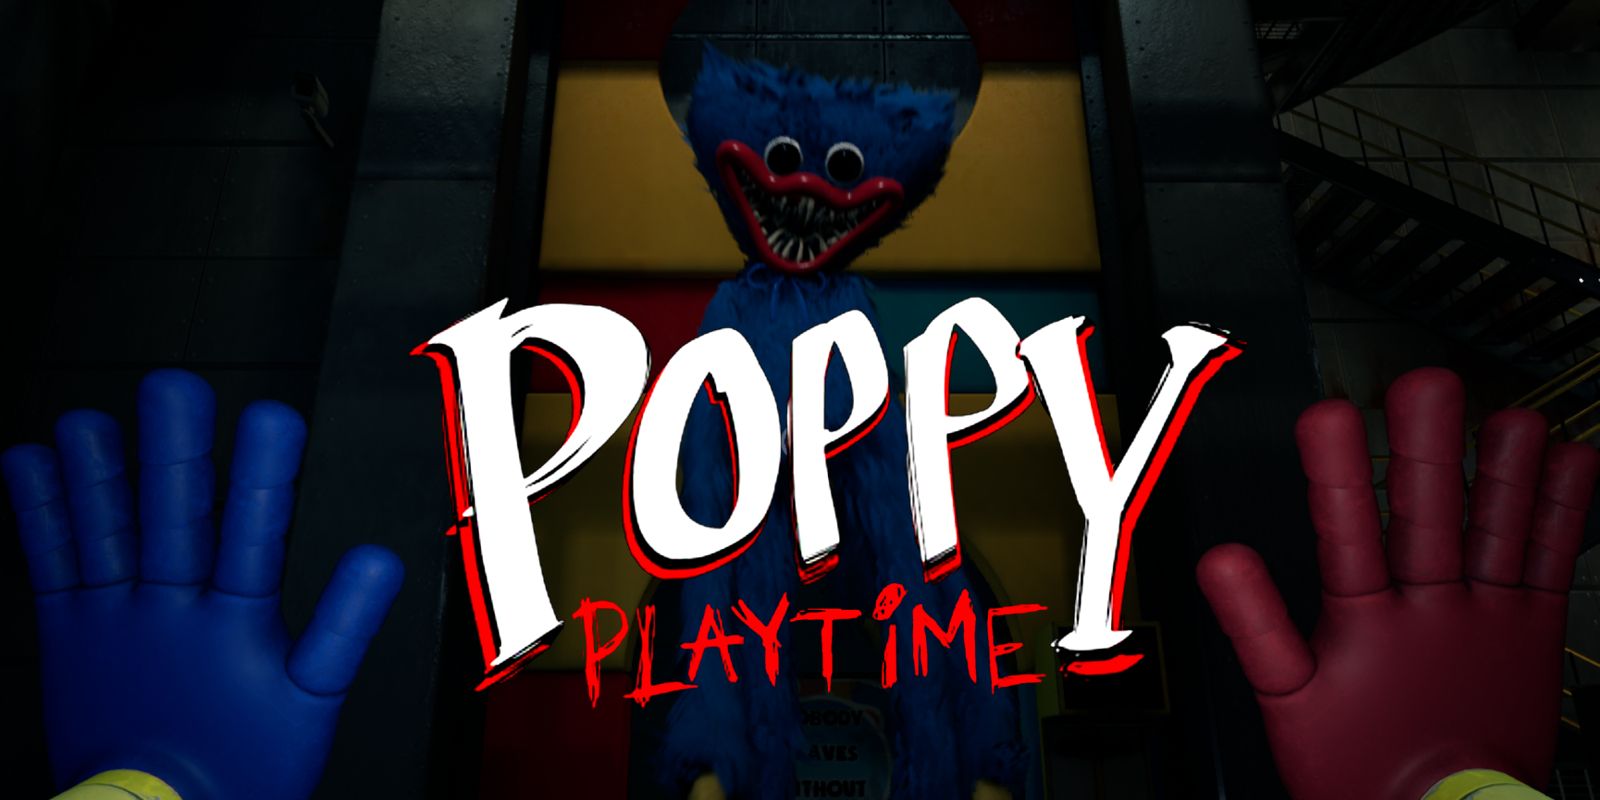 Poppy Playtime developer, MOB Games, to launch a free-to-play co-op horror  experience this December - Project: Playtime - Gamereactor